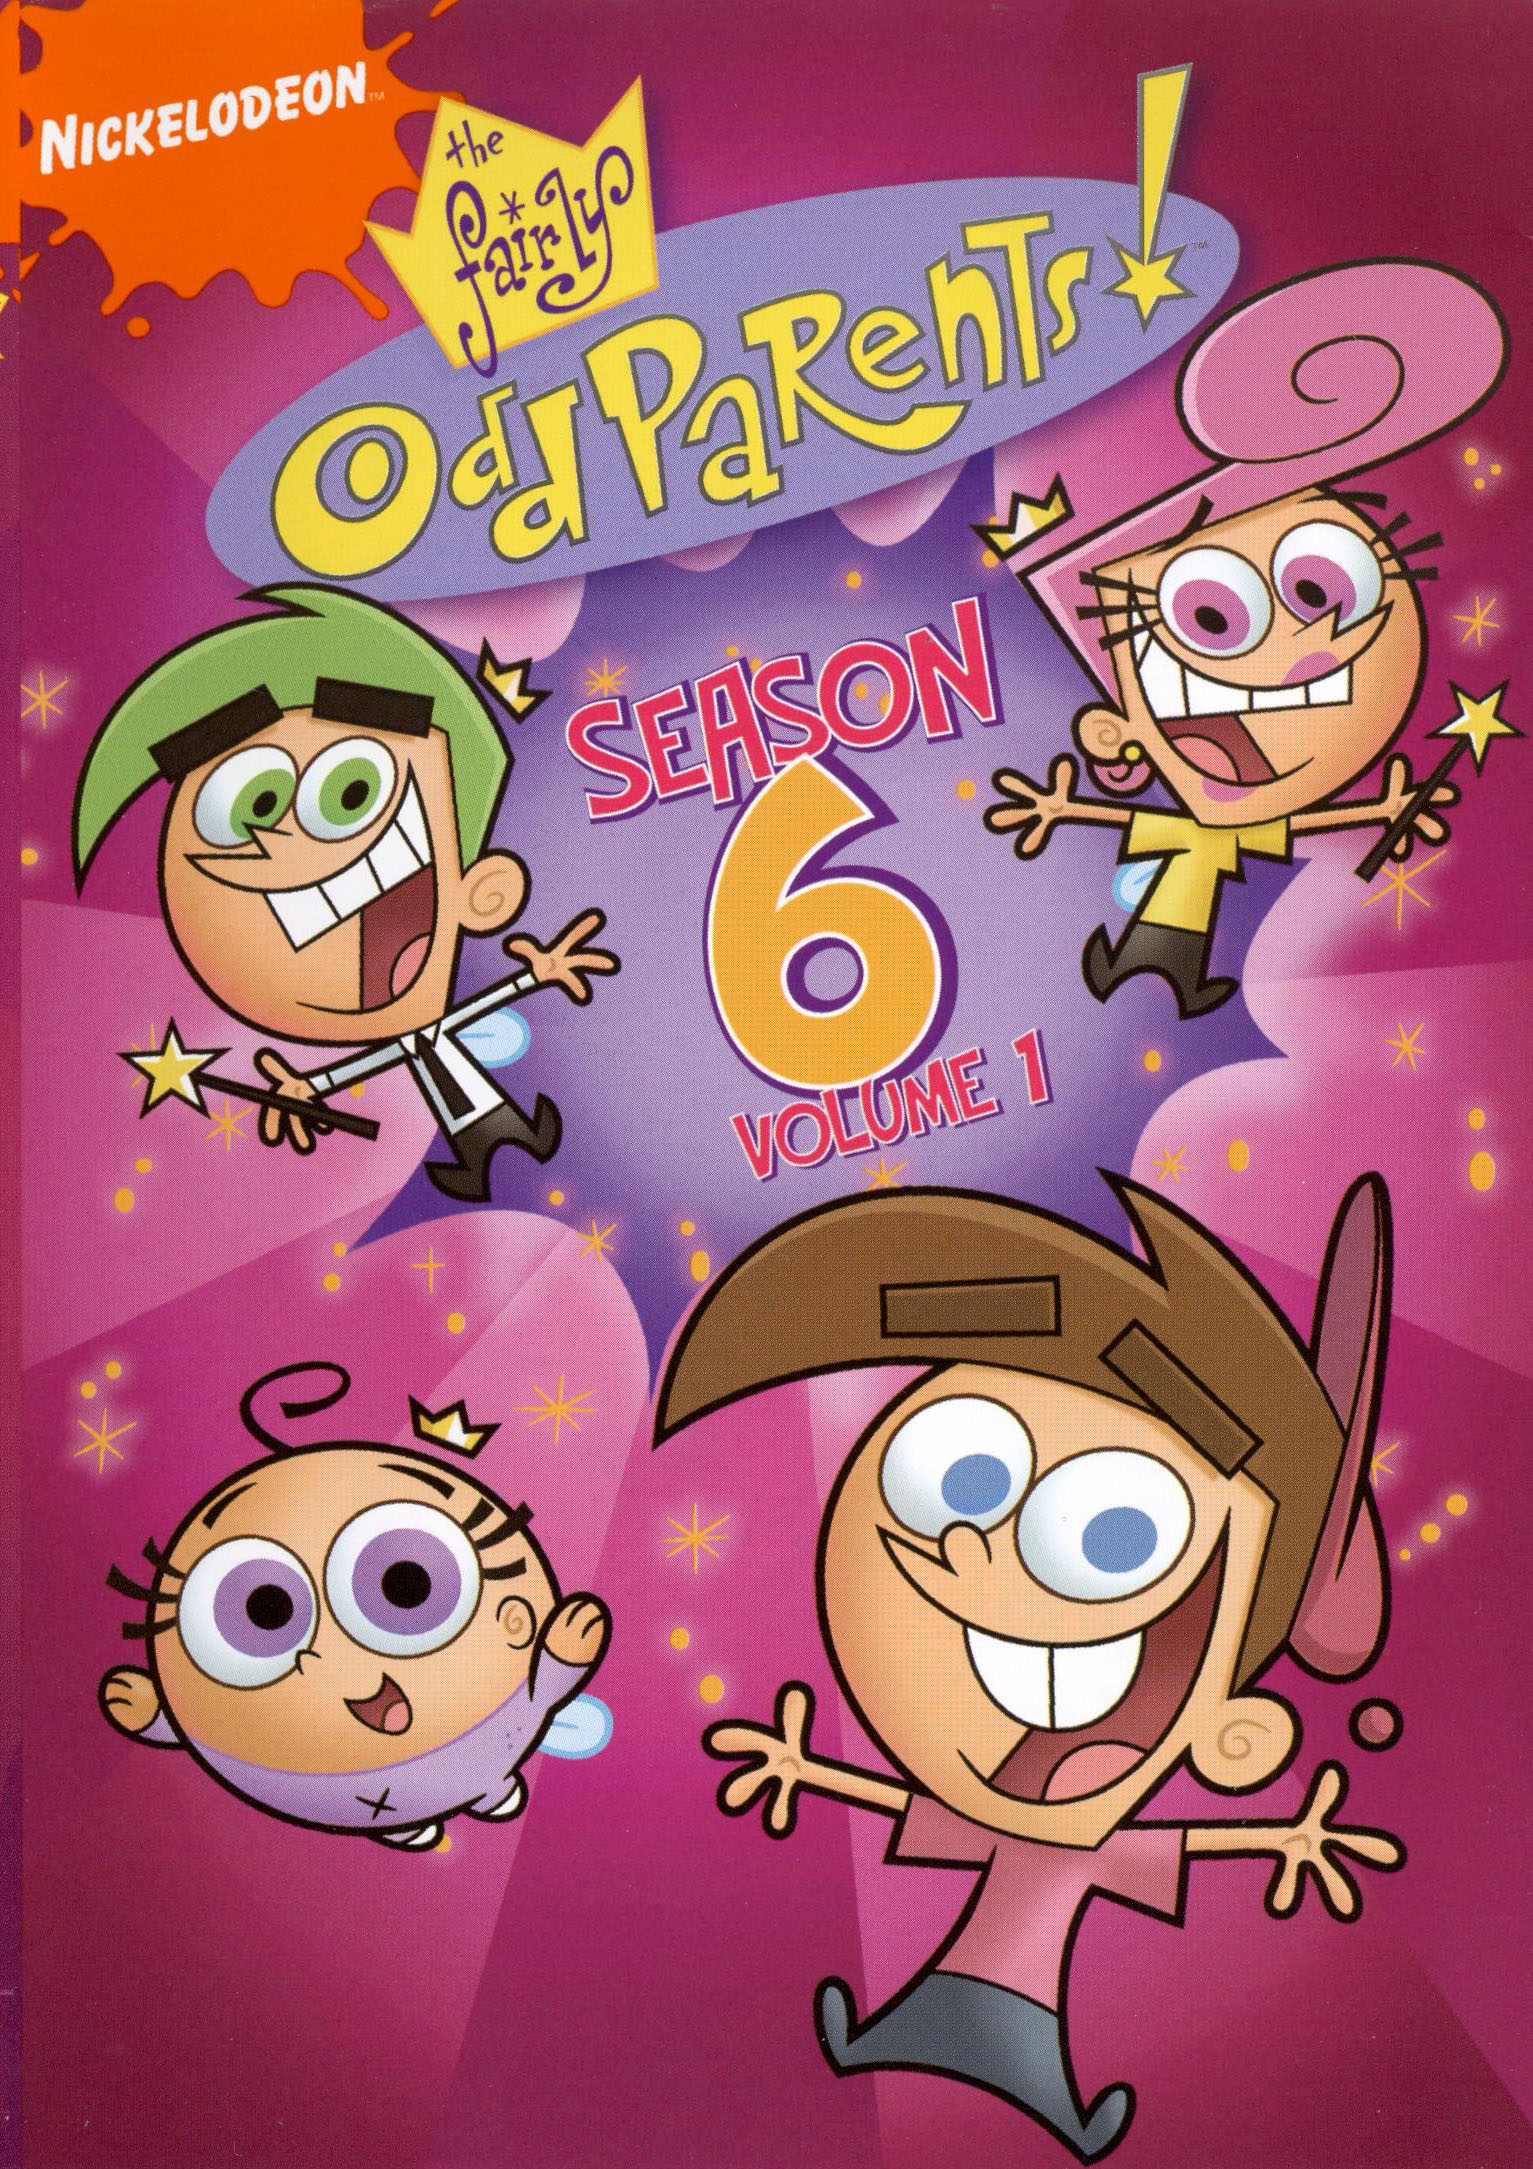 Fairly oddparents complete series